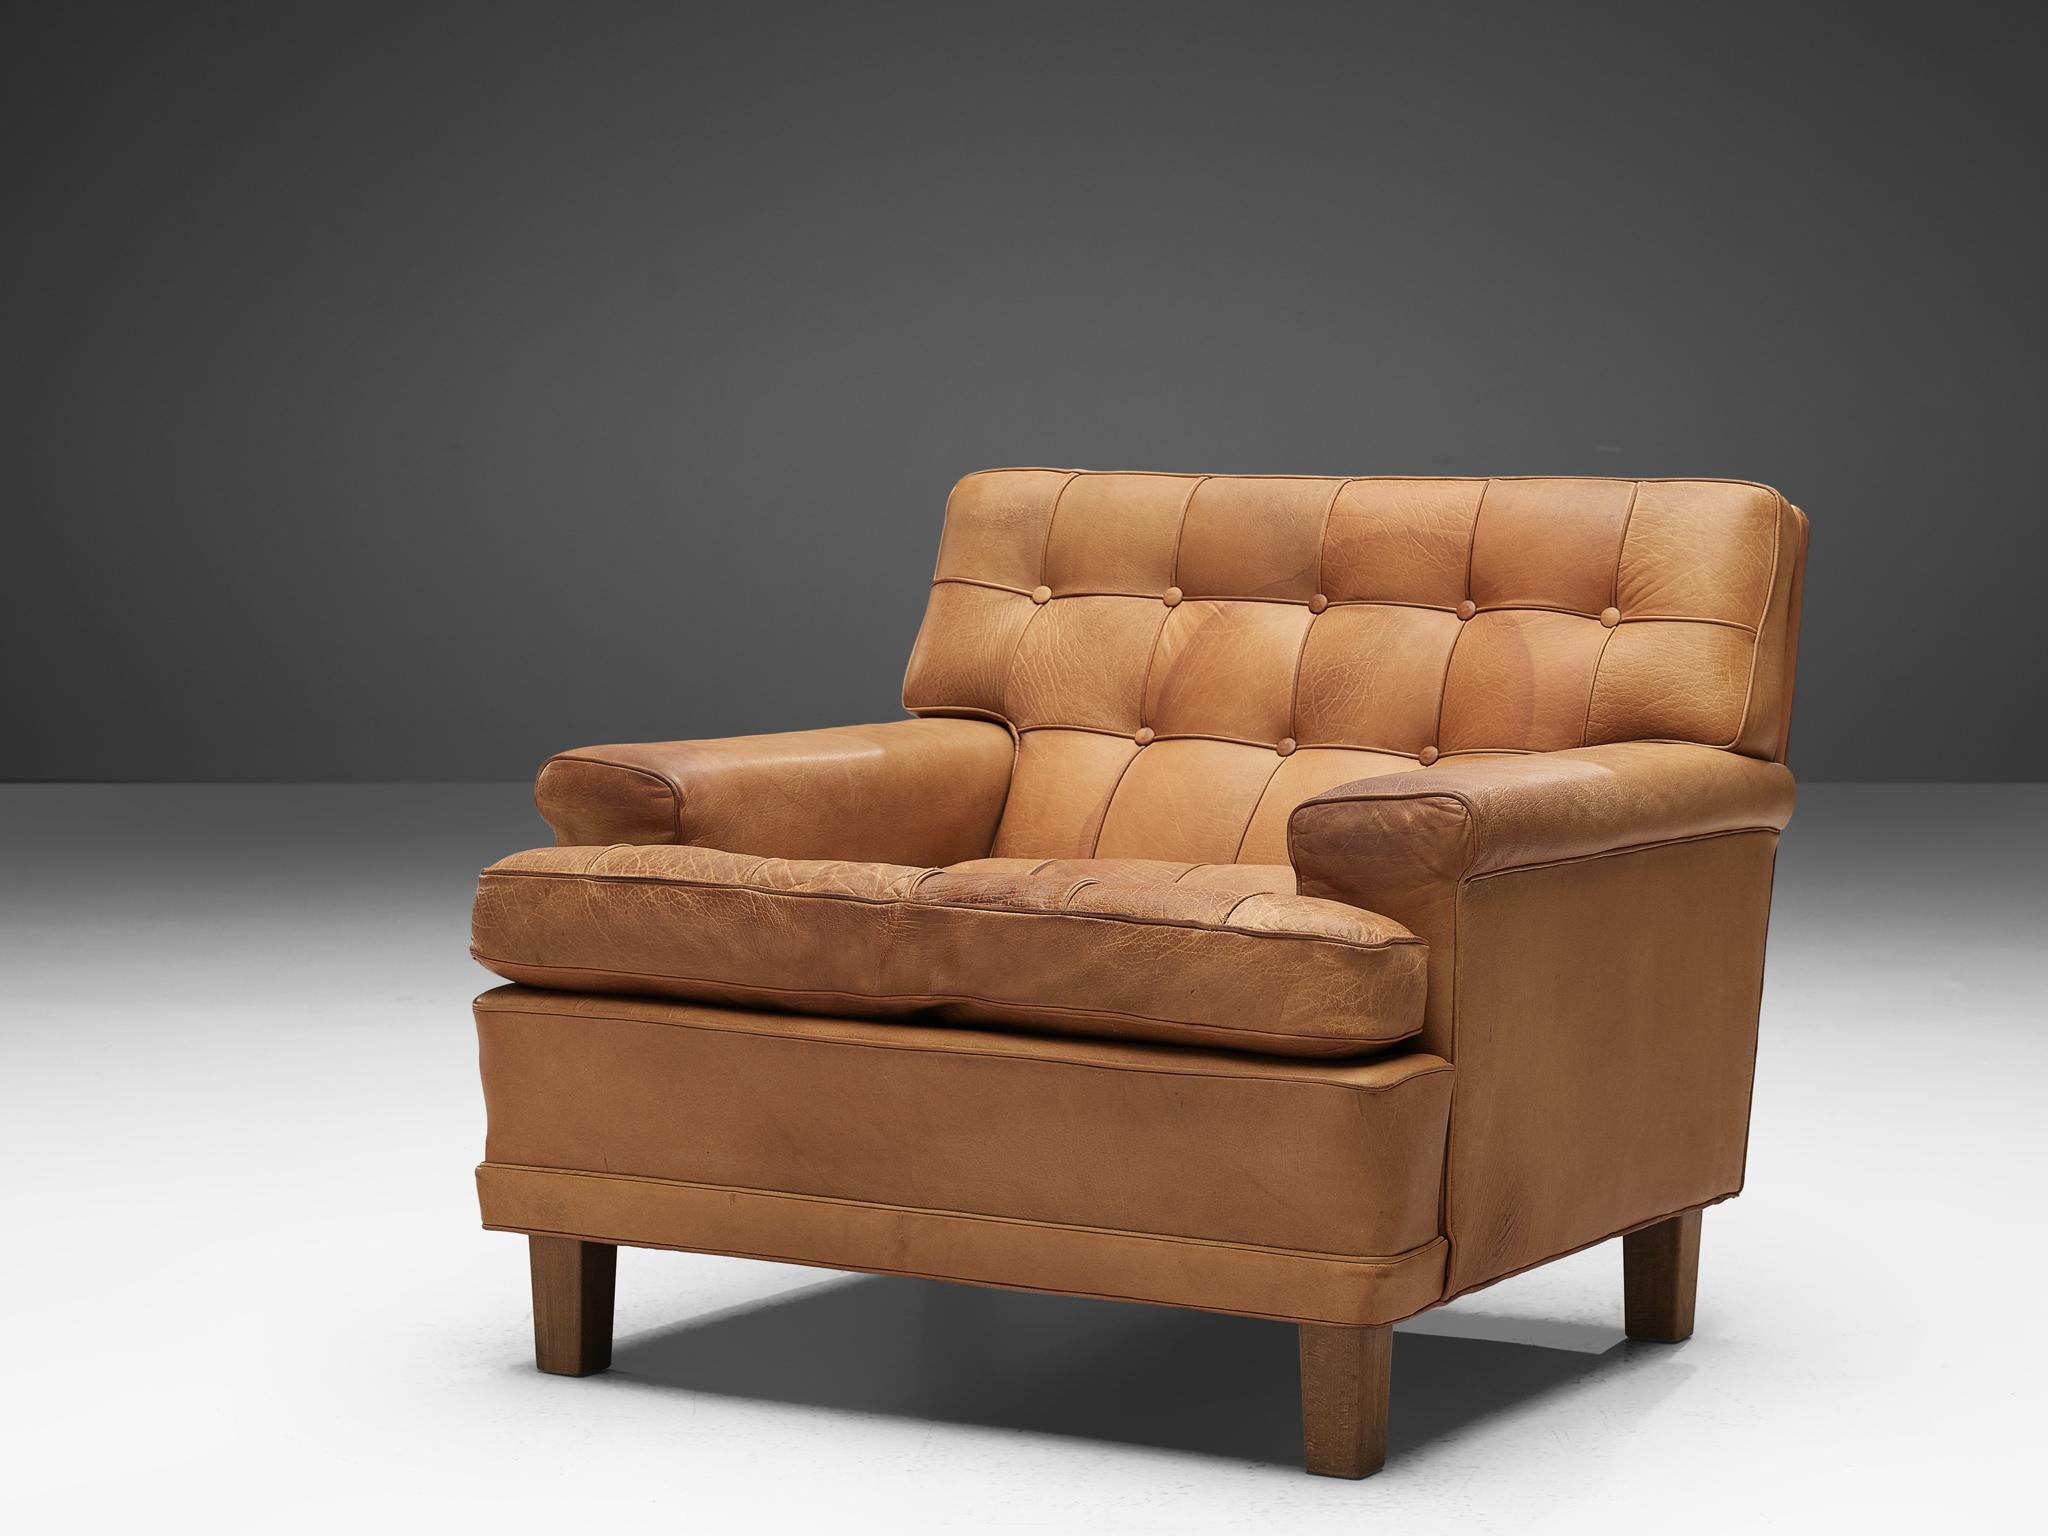 Arne Norell, lounge chair, in leather and wood, Sweden, 1960s.

Lounge chair designed by Arne Norell with wonderful shapes and comfort in cognac leather. The tufted leather cushions give these chairs an interesting appearance. The original buffalo